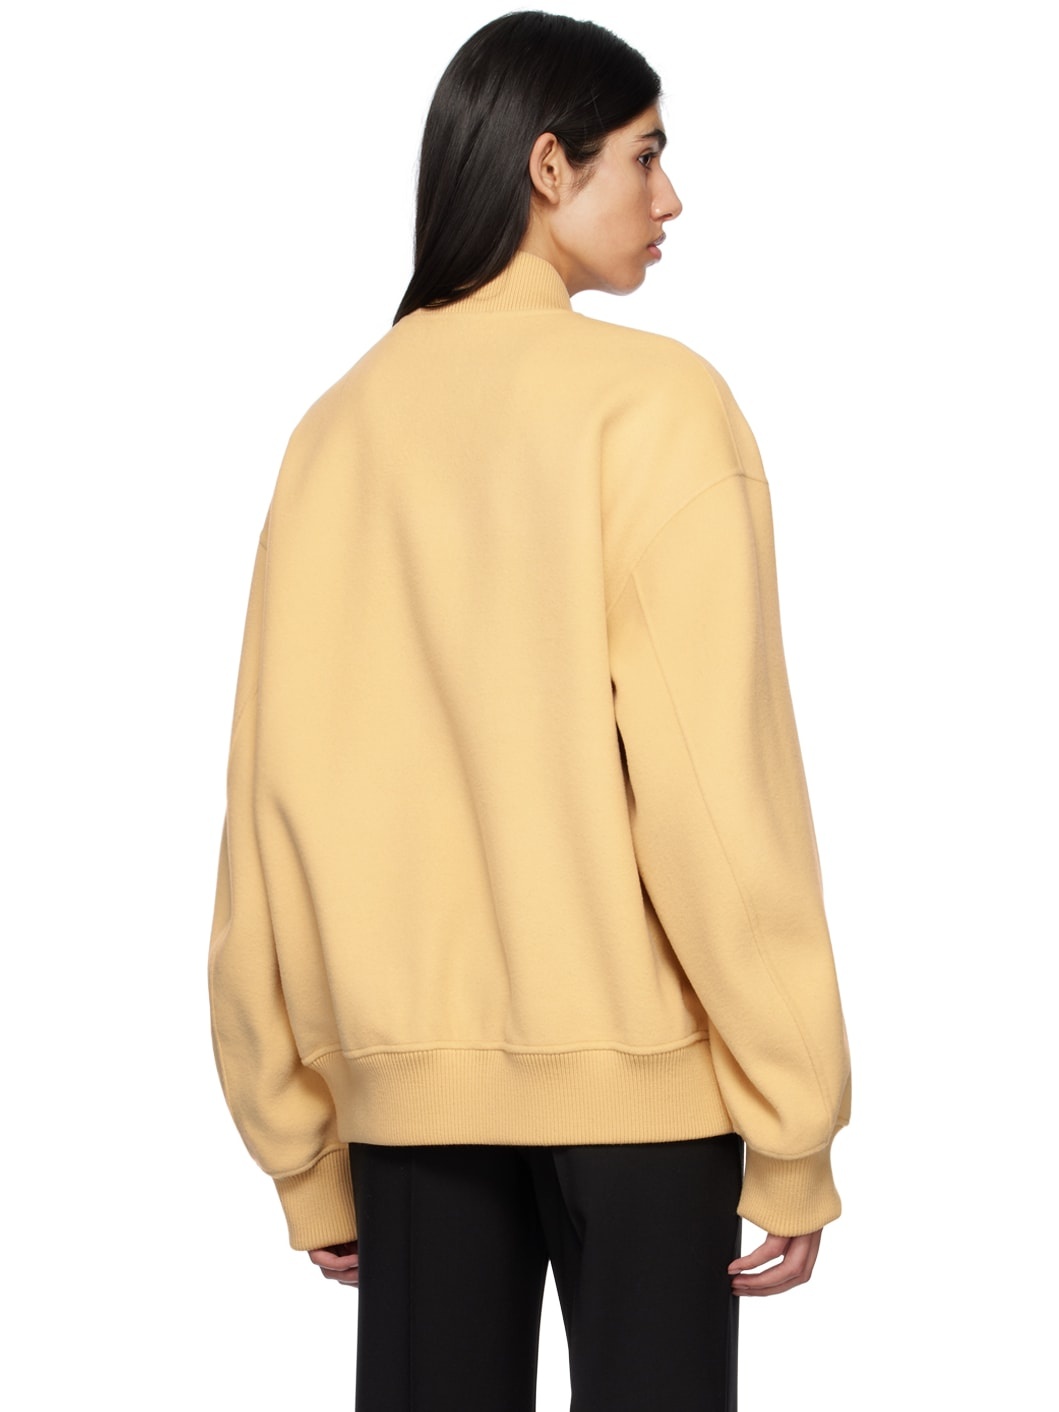 Yellow Double-Faced Bomber Jacket - 3